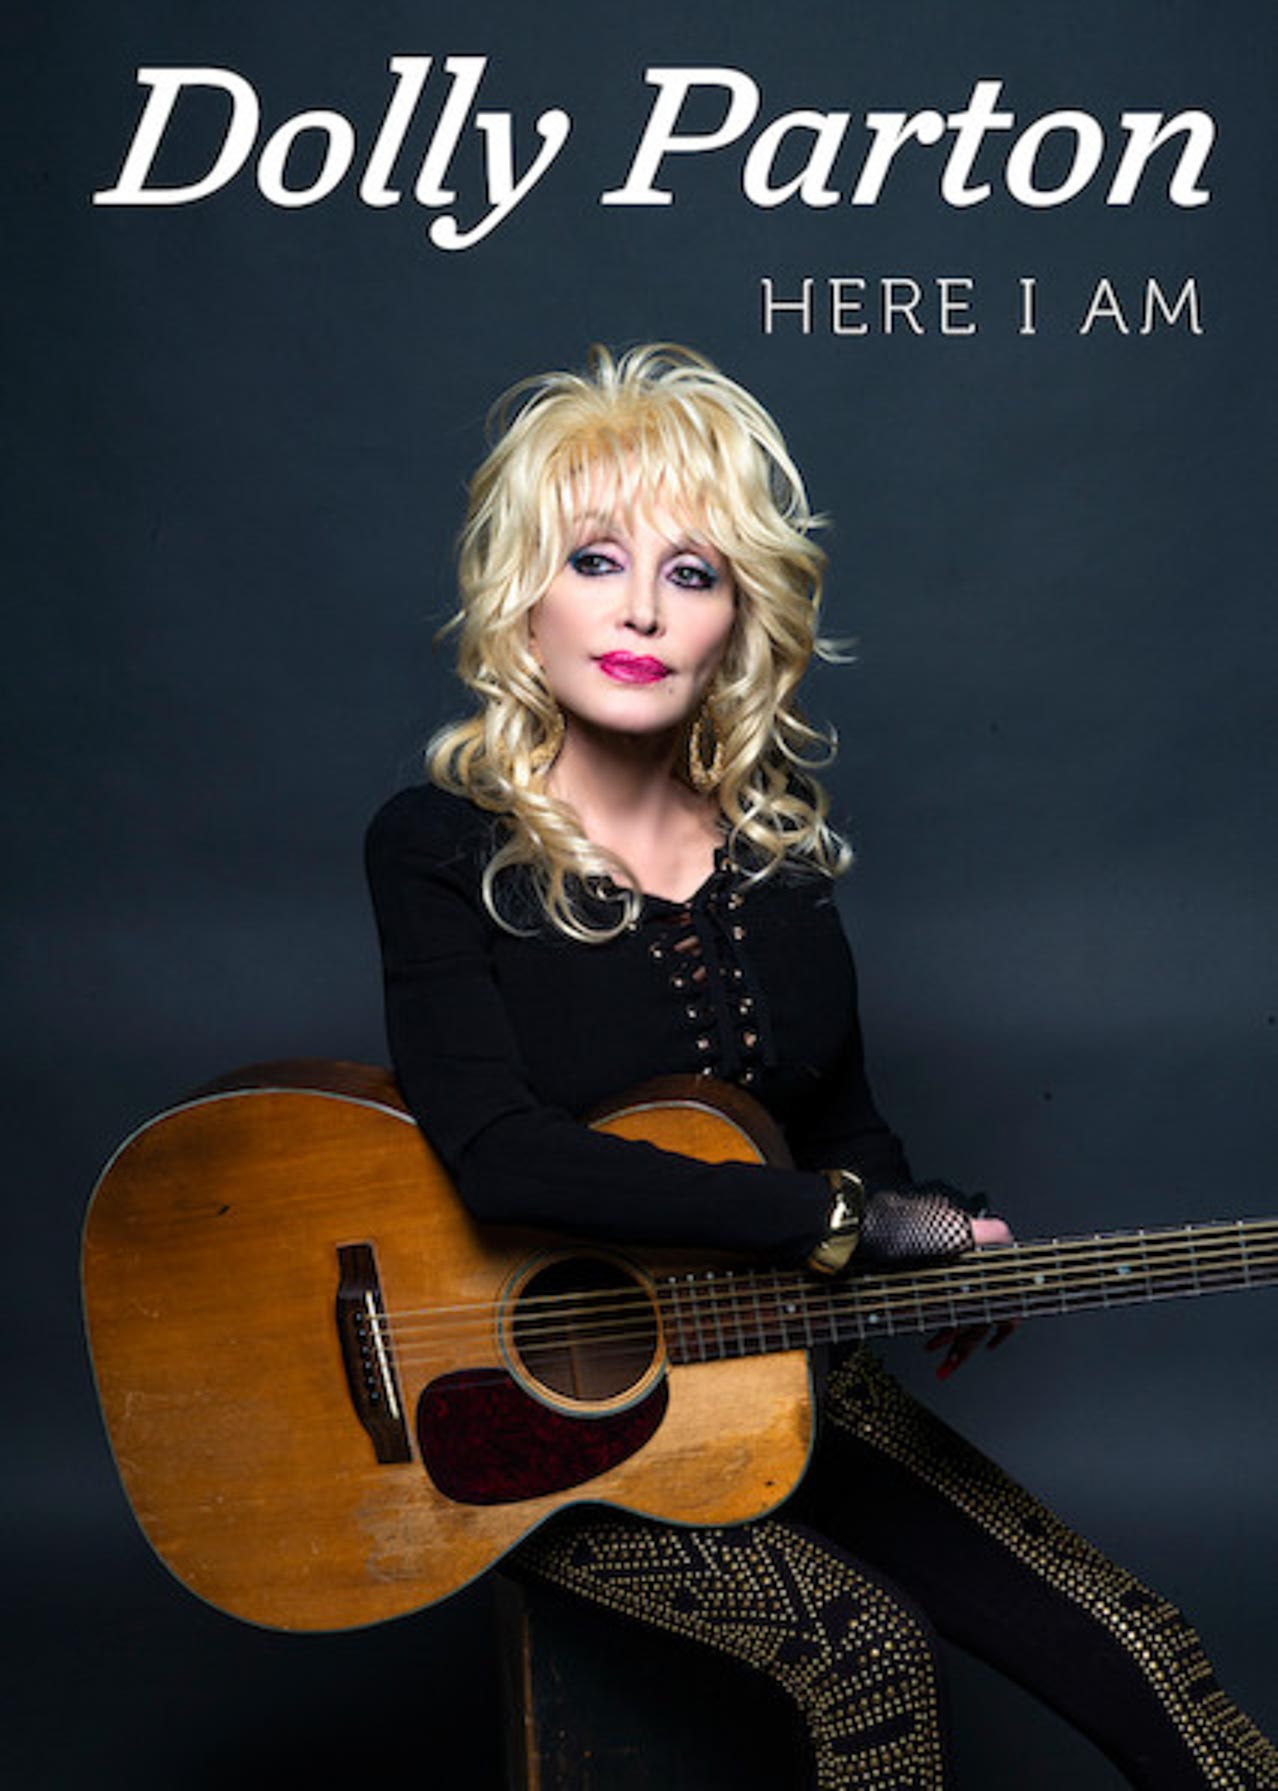 Dolly Parton Here I am cover